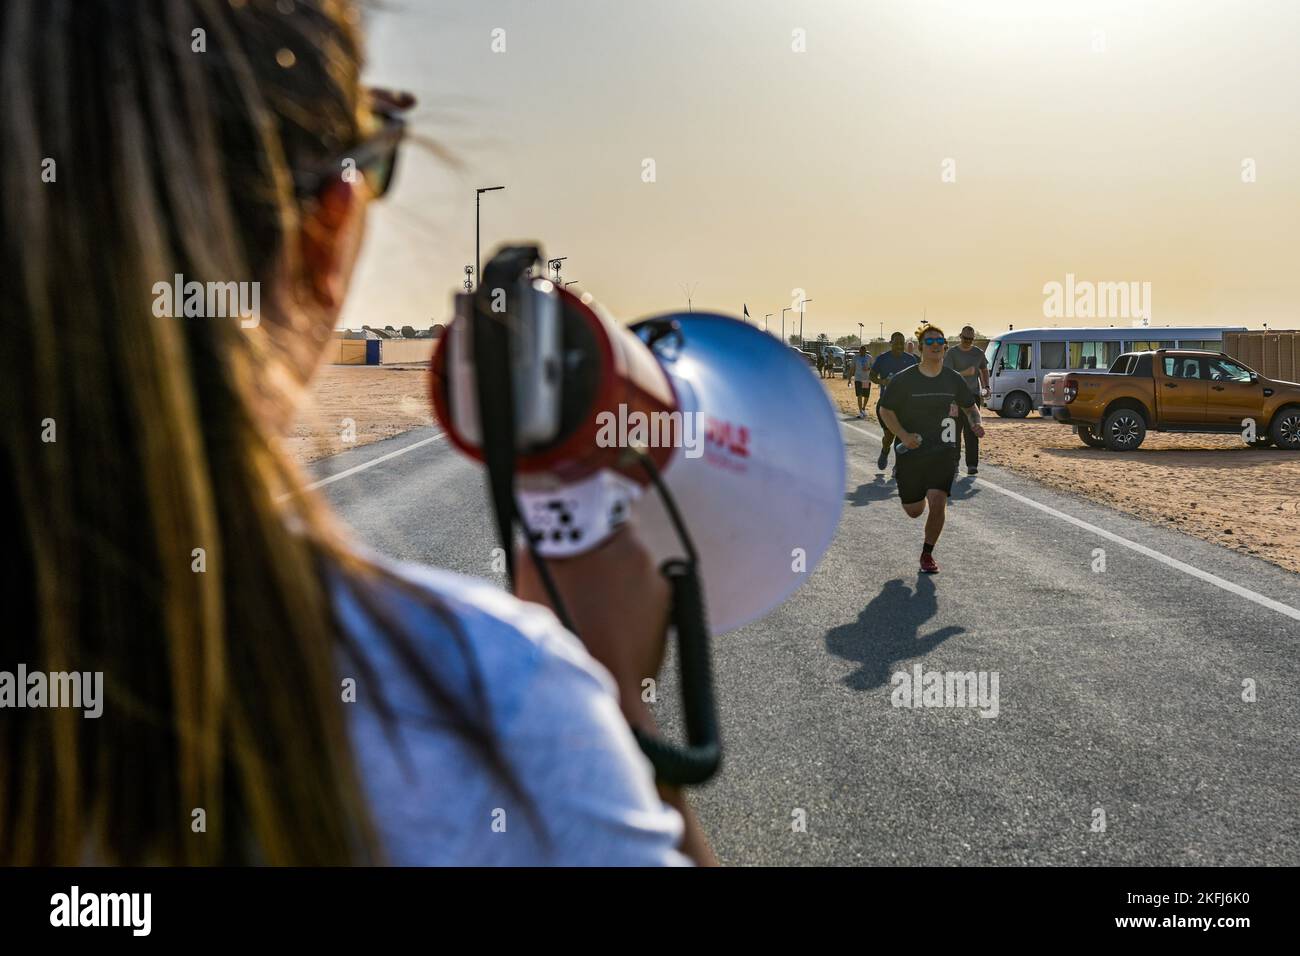 A U.S. service member deployed to Prince Sultan Air Base, Kingdom of Saudi Arabia, cheers on here comrades running a 5K, 10K or half marathon in celebration of the U.S. Air Force’s 75th Anniversary, Sept.18, 2022. The USAF official separated from the U.S. Army with the signing of the National Security Act of 1947 by former U.S. President Harry Truman. Fly, Fight and Win - Airpower Anytime, Anywhere! Stock Photo